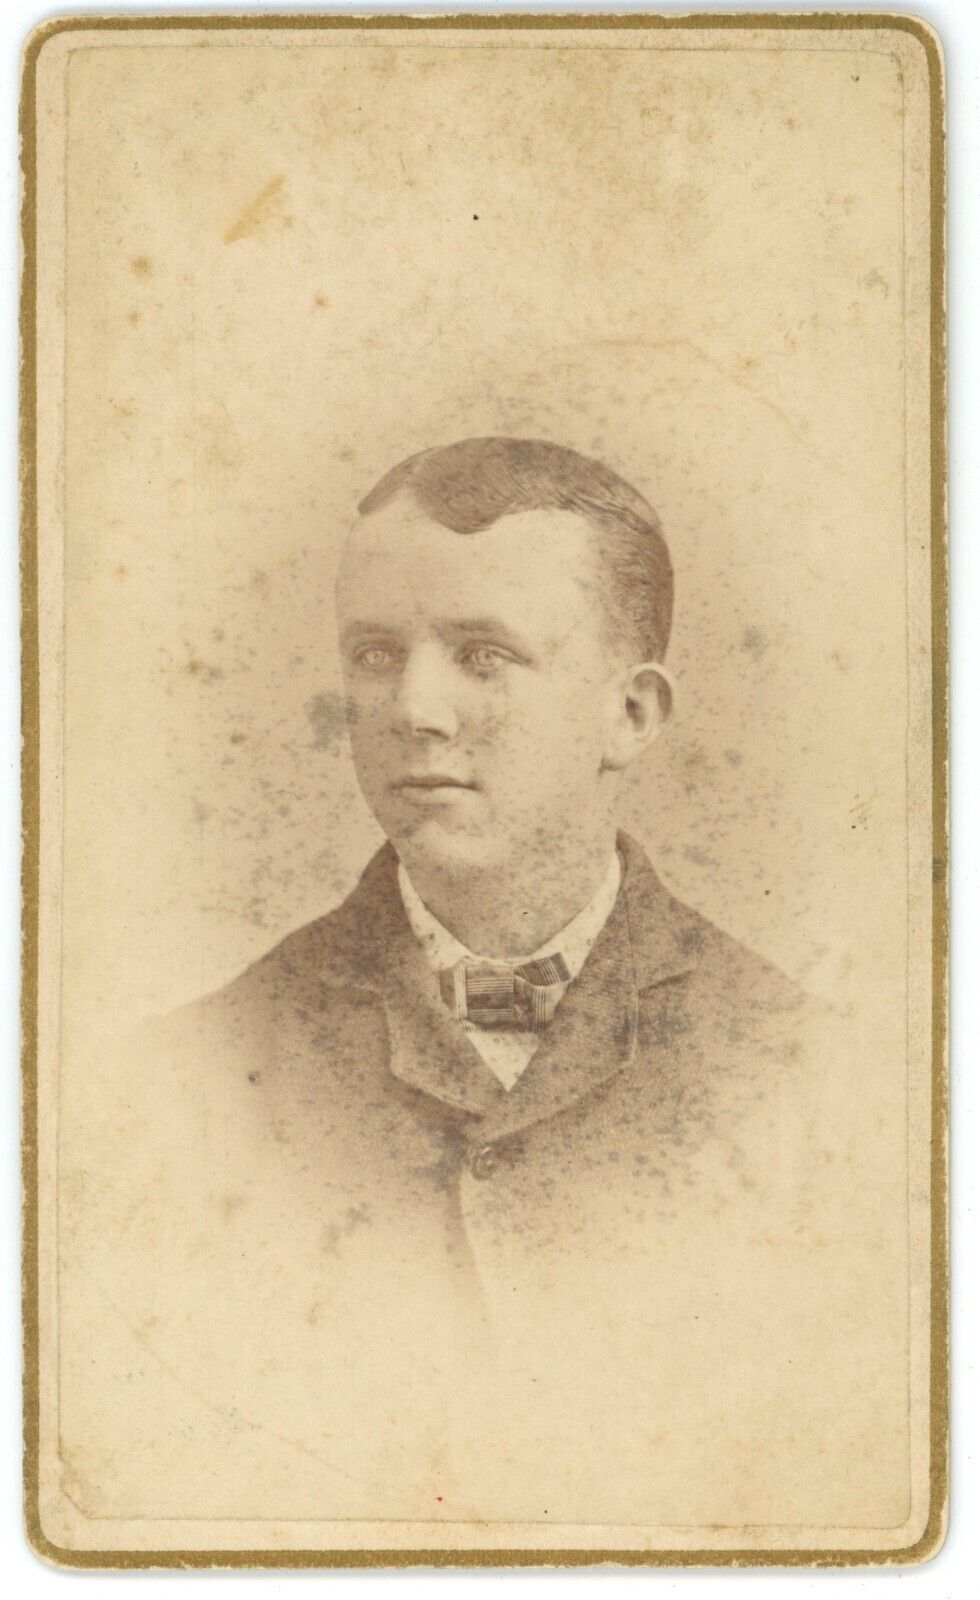 CIRCA 1880'S ANTIQUE CDV OF YOUNG BOY IN SUIT W. HAUNTING PIERCING EYES - NAMED